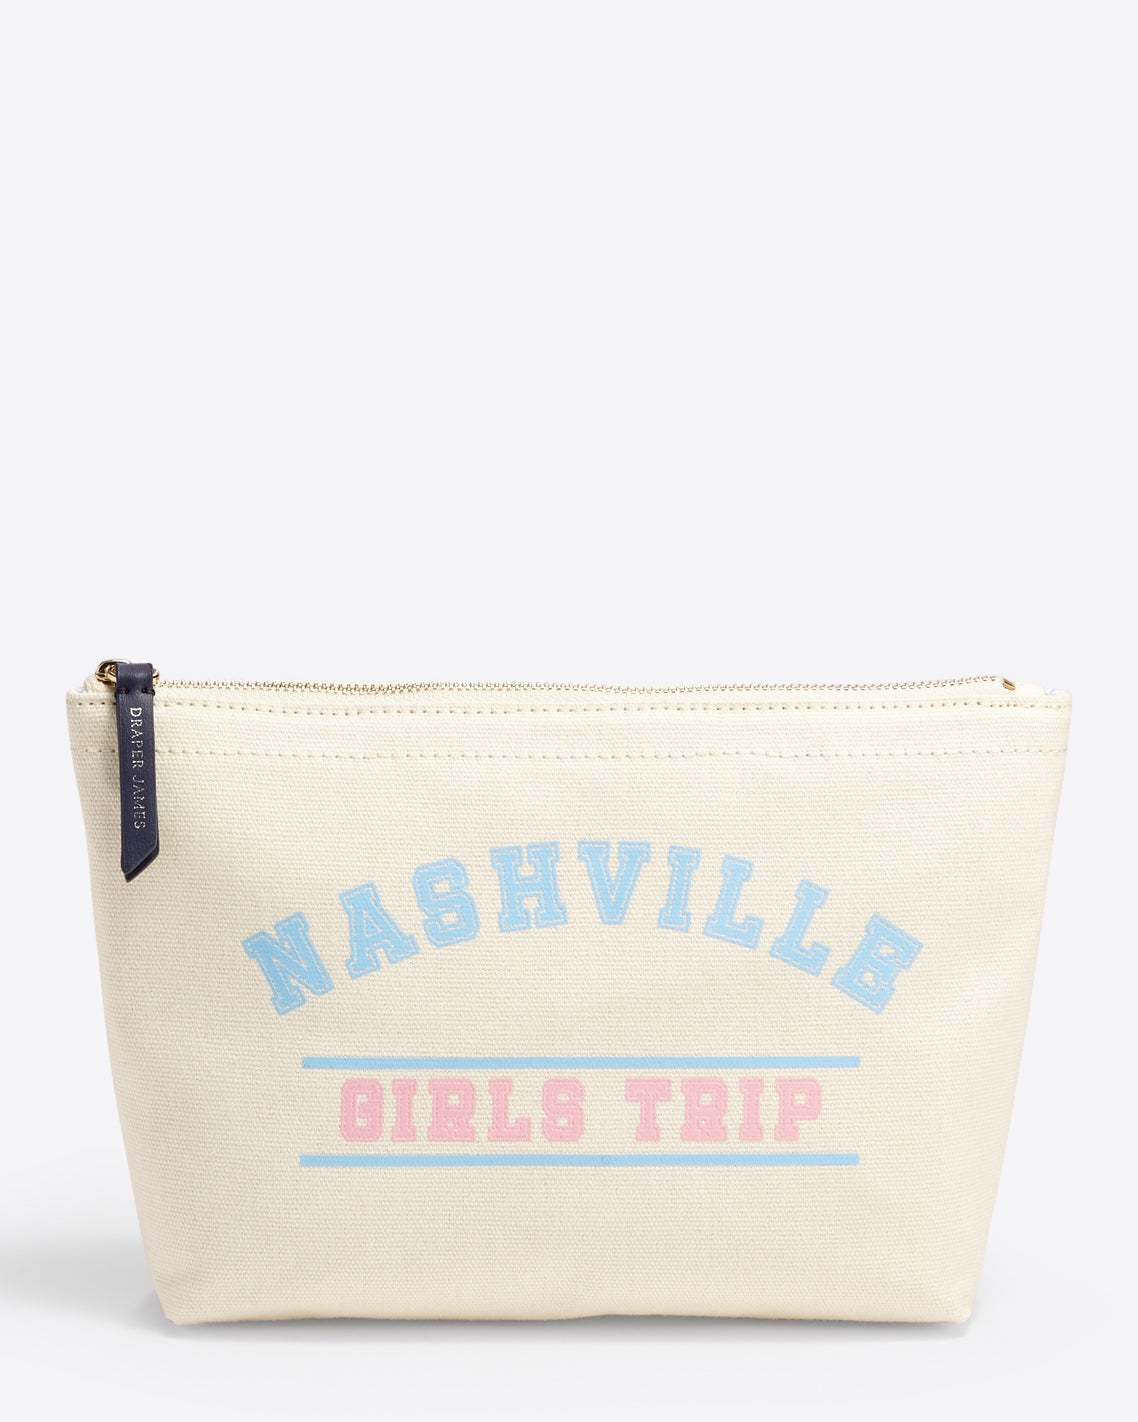 Nashville Girls Trip Cosmetic Pouch